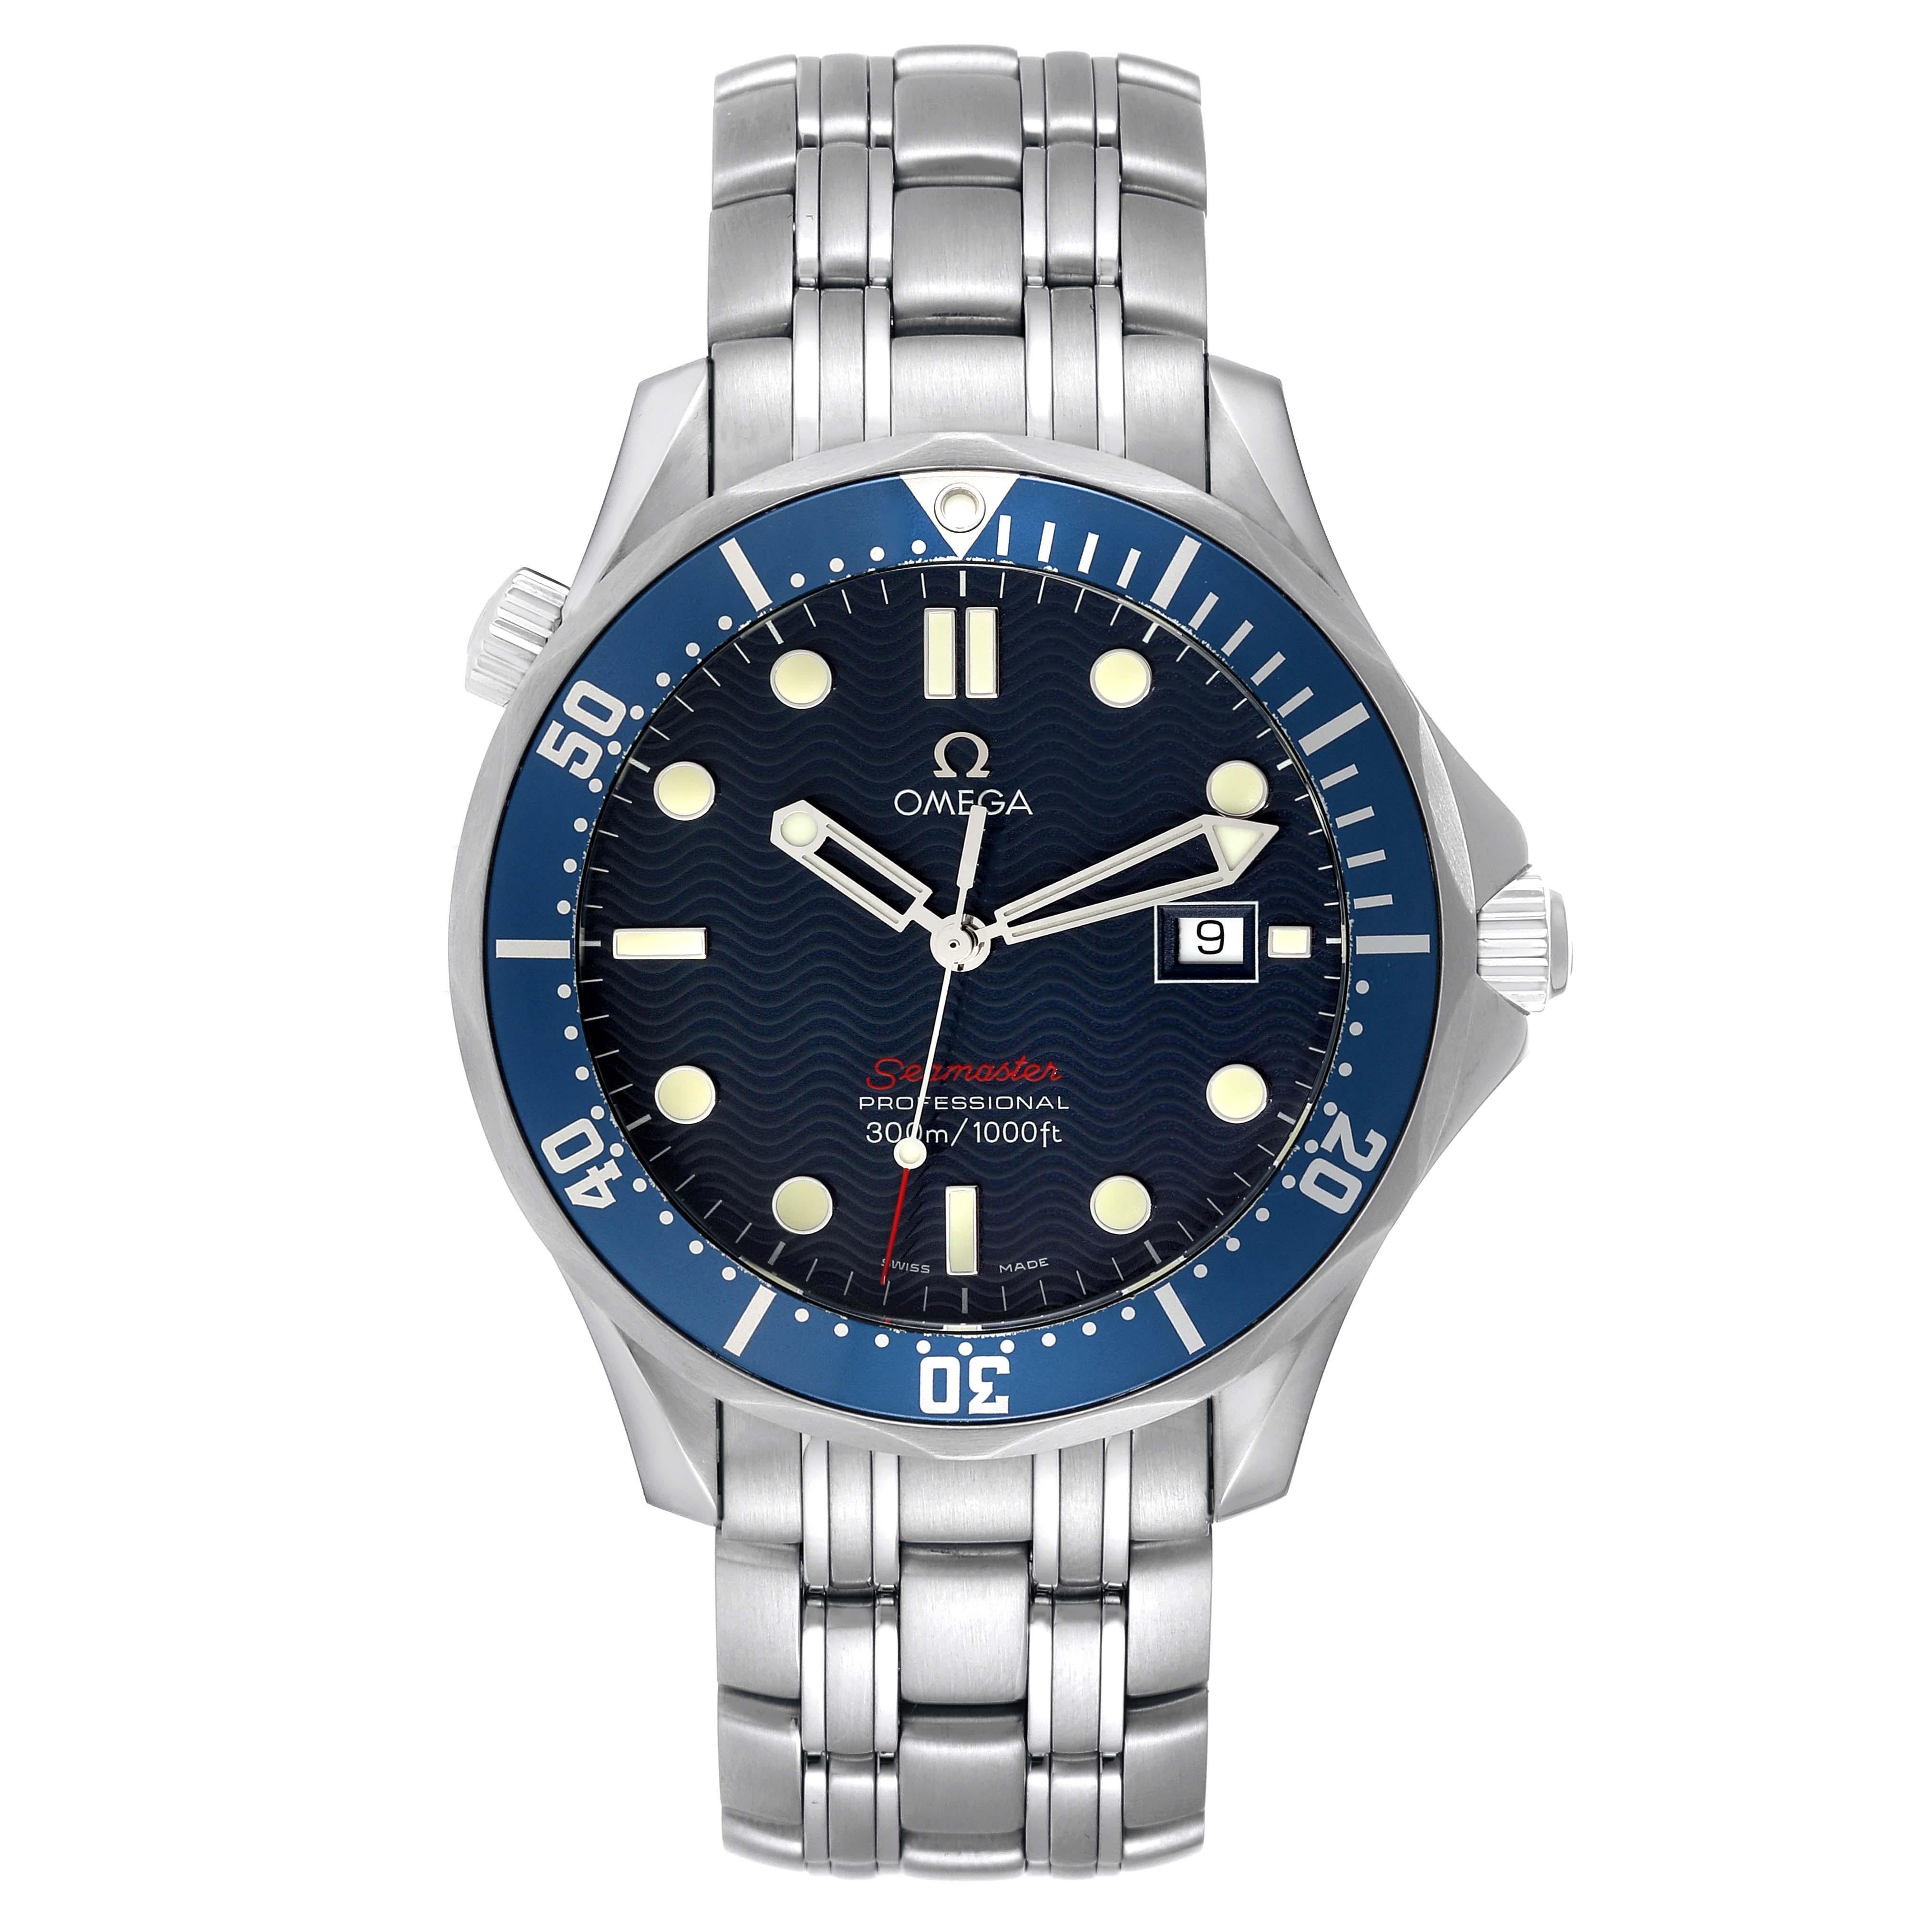 Omega Seamaster Bond 300M Blue Dial Steel Mens Watch 2221.80.00 Box Card. Quartz movement. Stainless steel case 41.0 mm in diameter. Omega logo on the crown. Blue unidirectional rotating bezel. Scratch resistant sapphire crystal. Blue wave decor